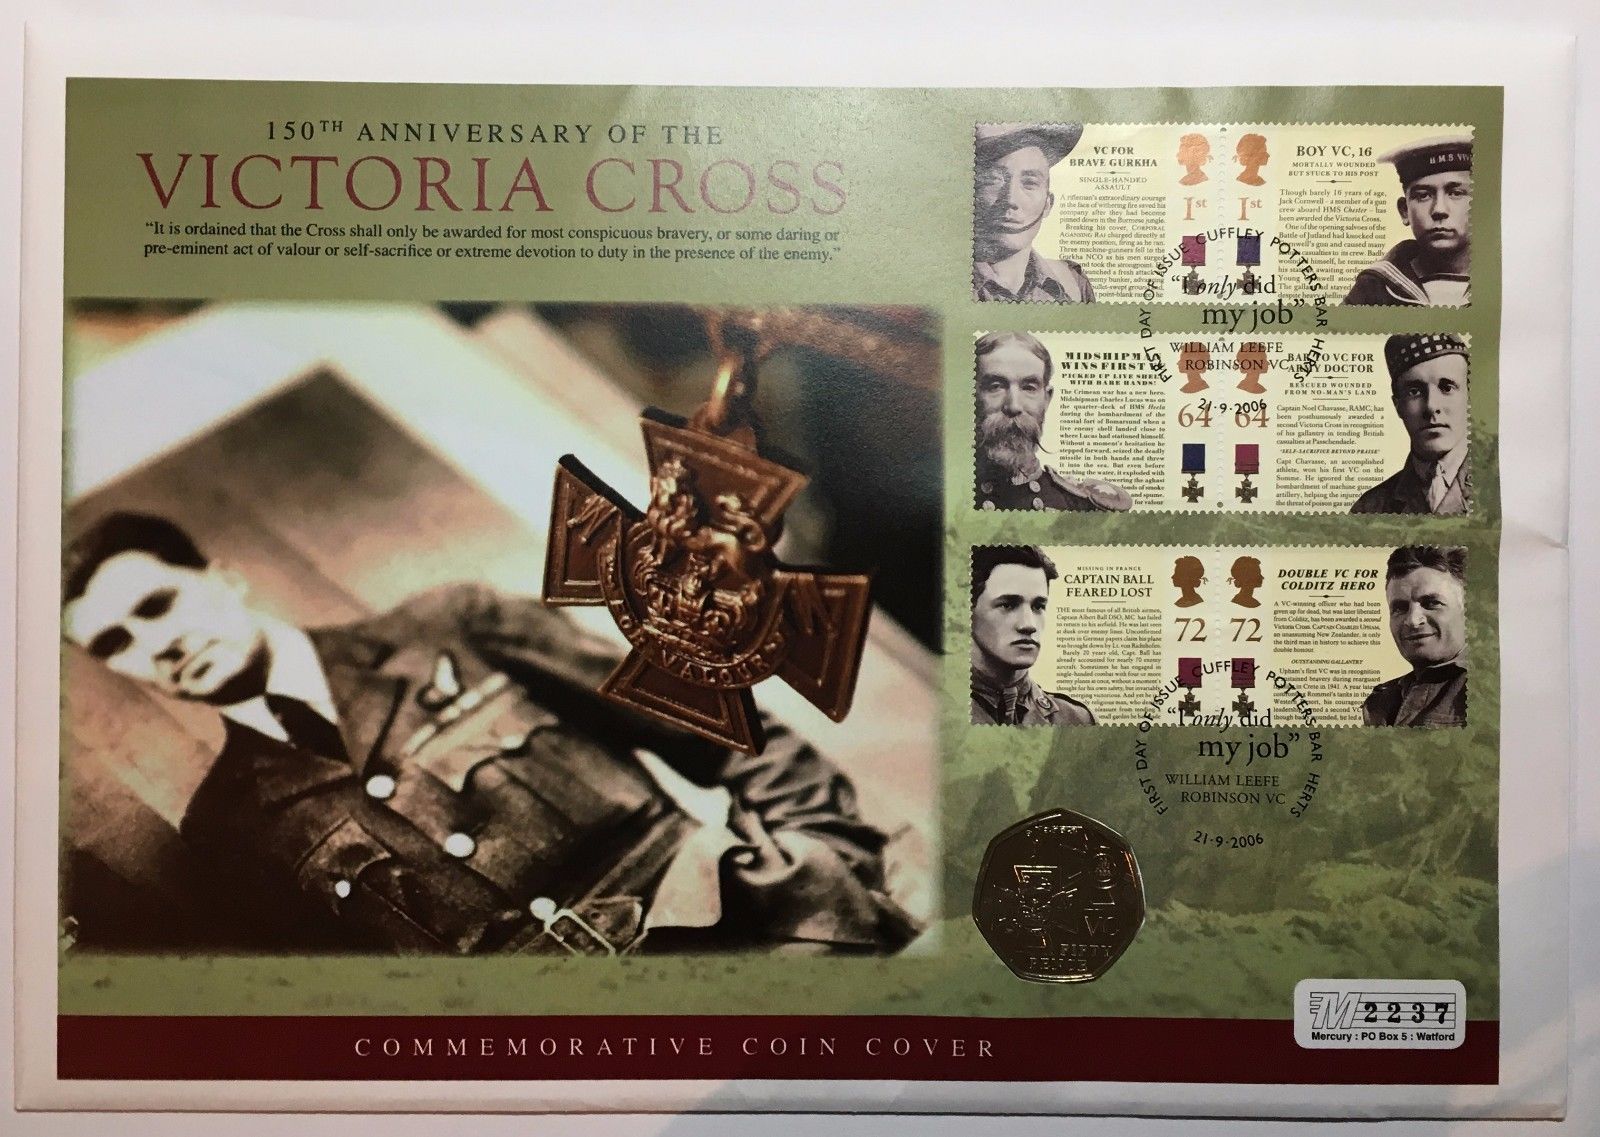 2006 150th Anniversary of the Victoria Cross Coin Cover with 50 Pence Coin